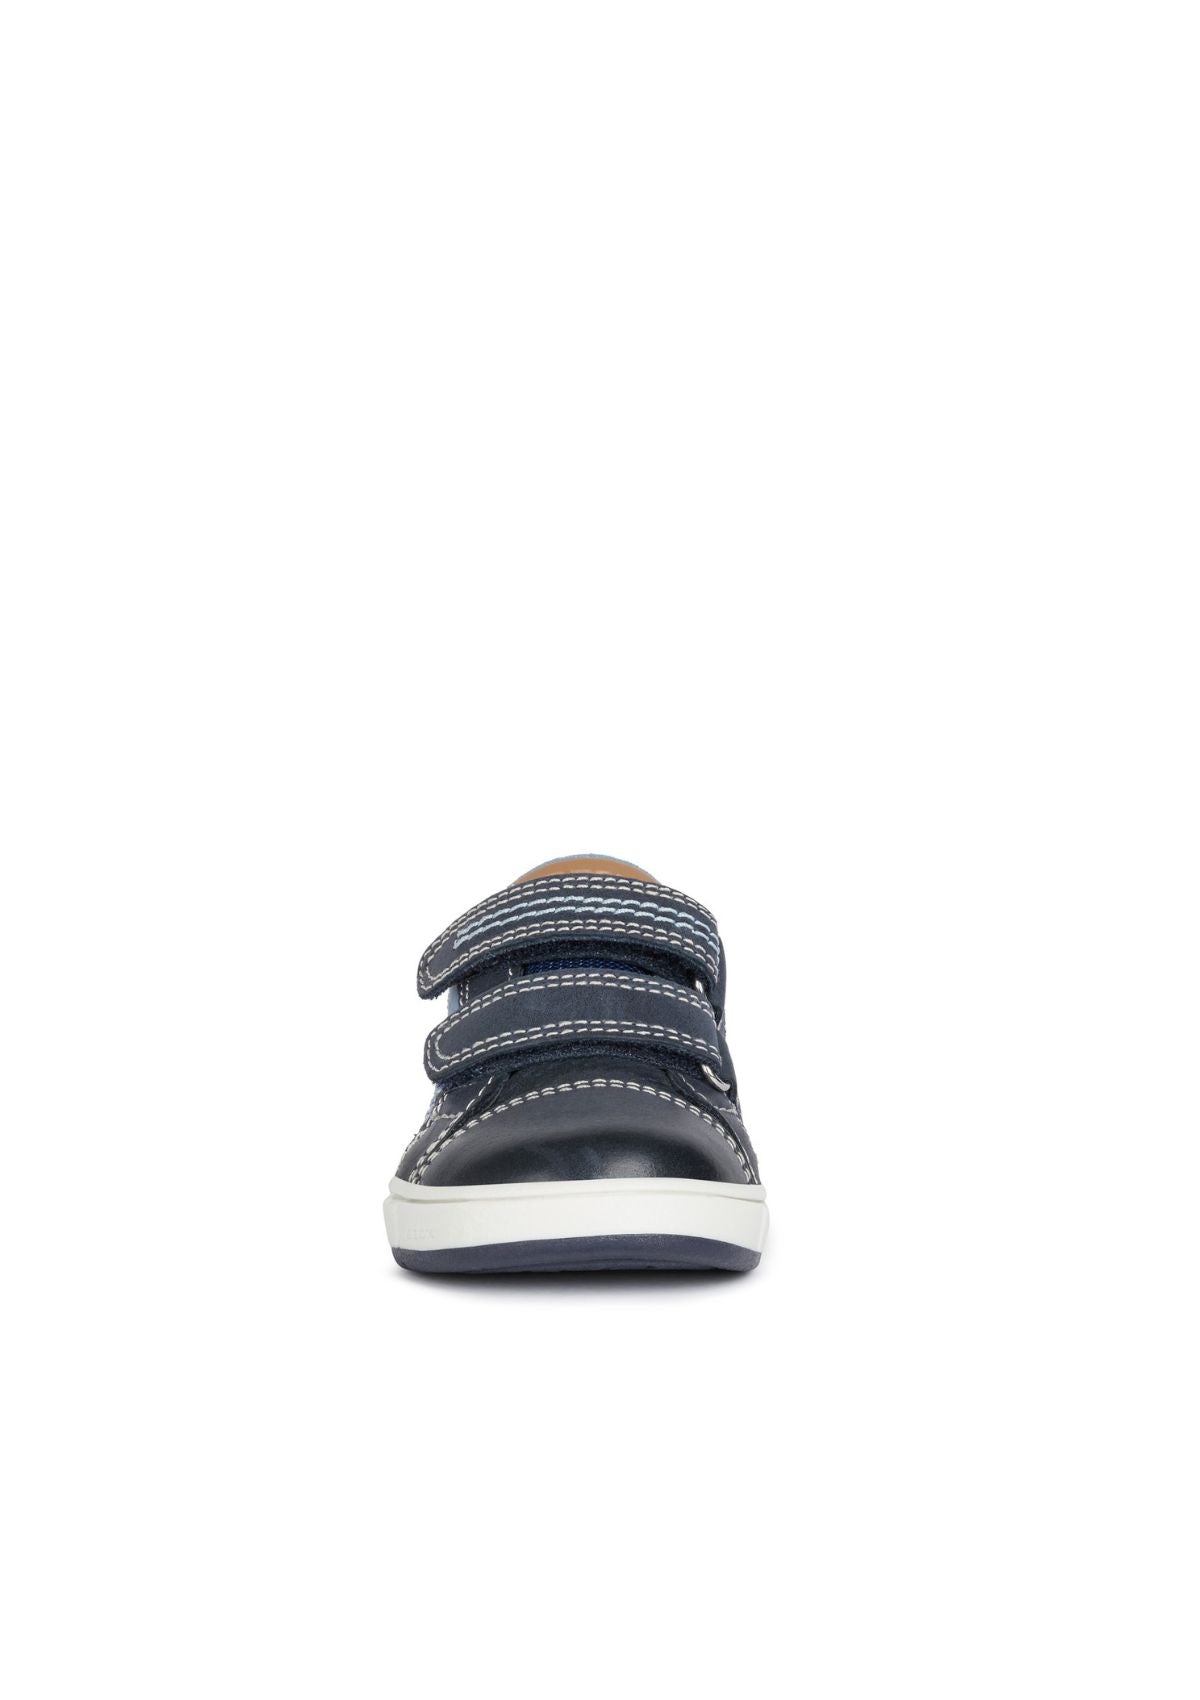 Geox Baby Boys Trainers TROTTOLA Navy White front